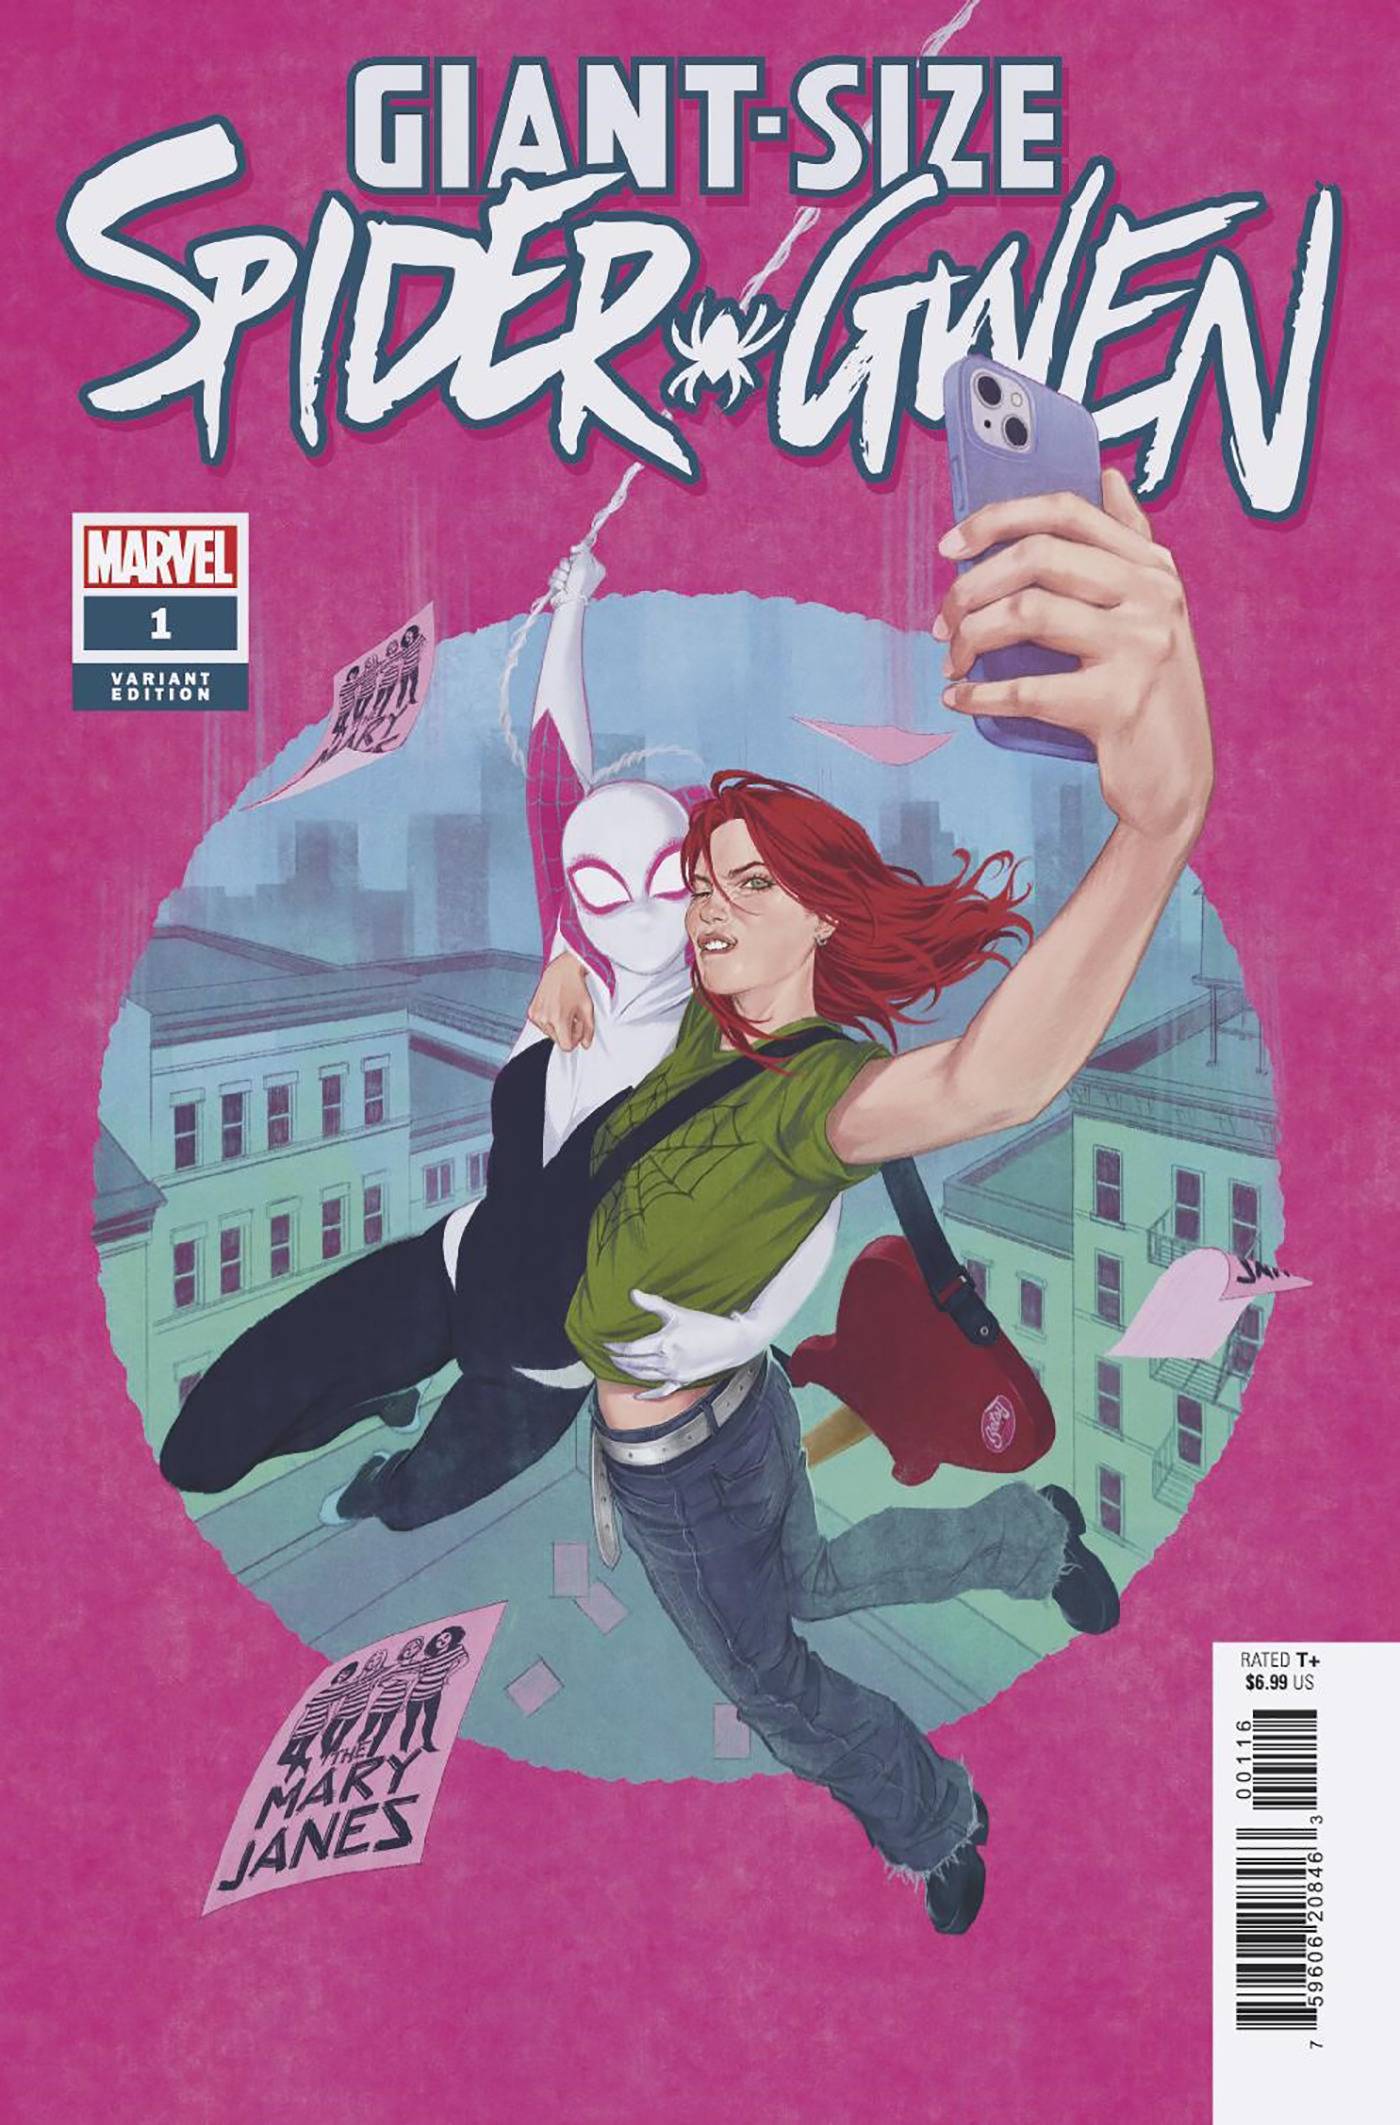 Giant-Size Spider-Gwen #1 Betsy Cola Variant 1 for 25 Incentive